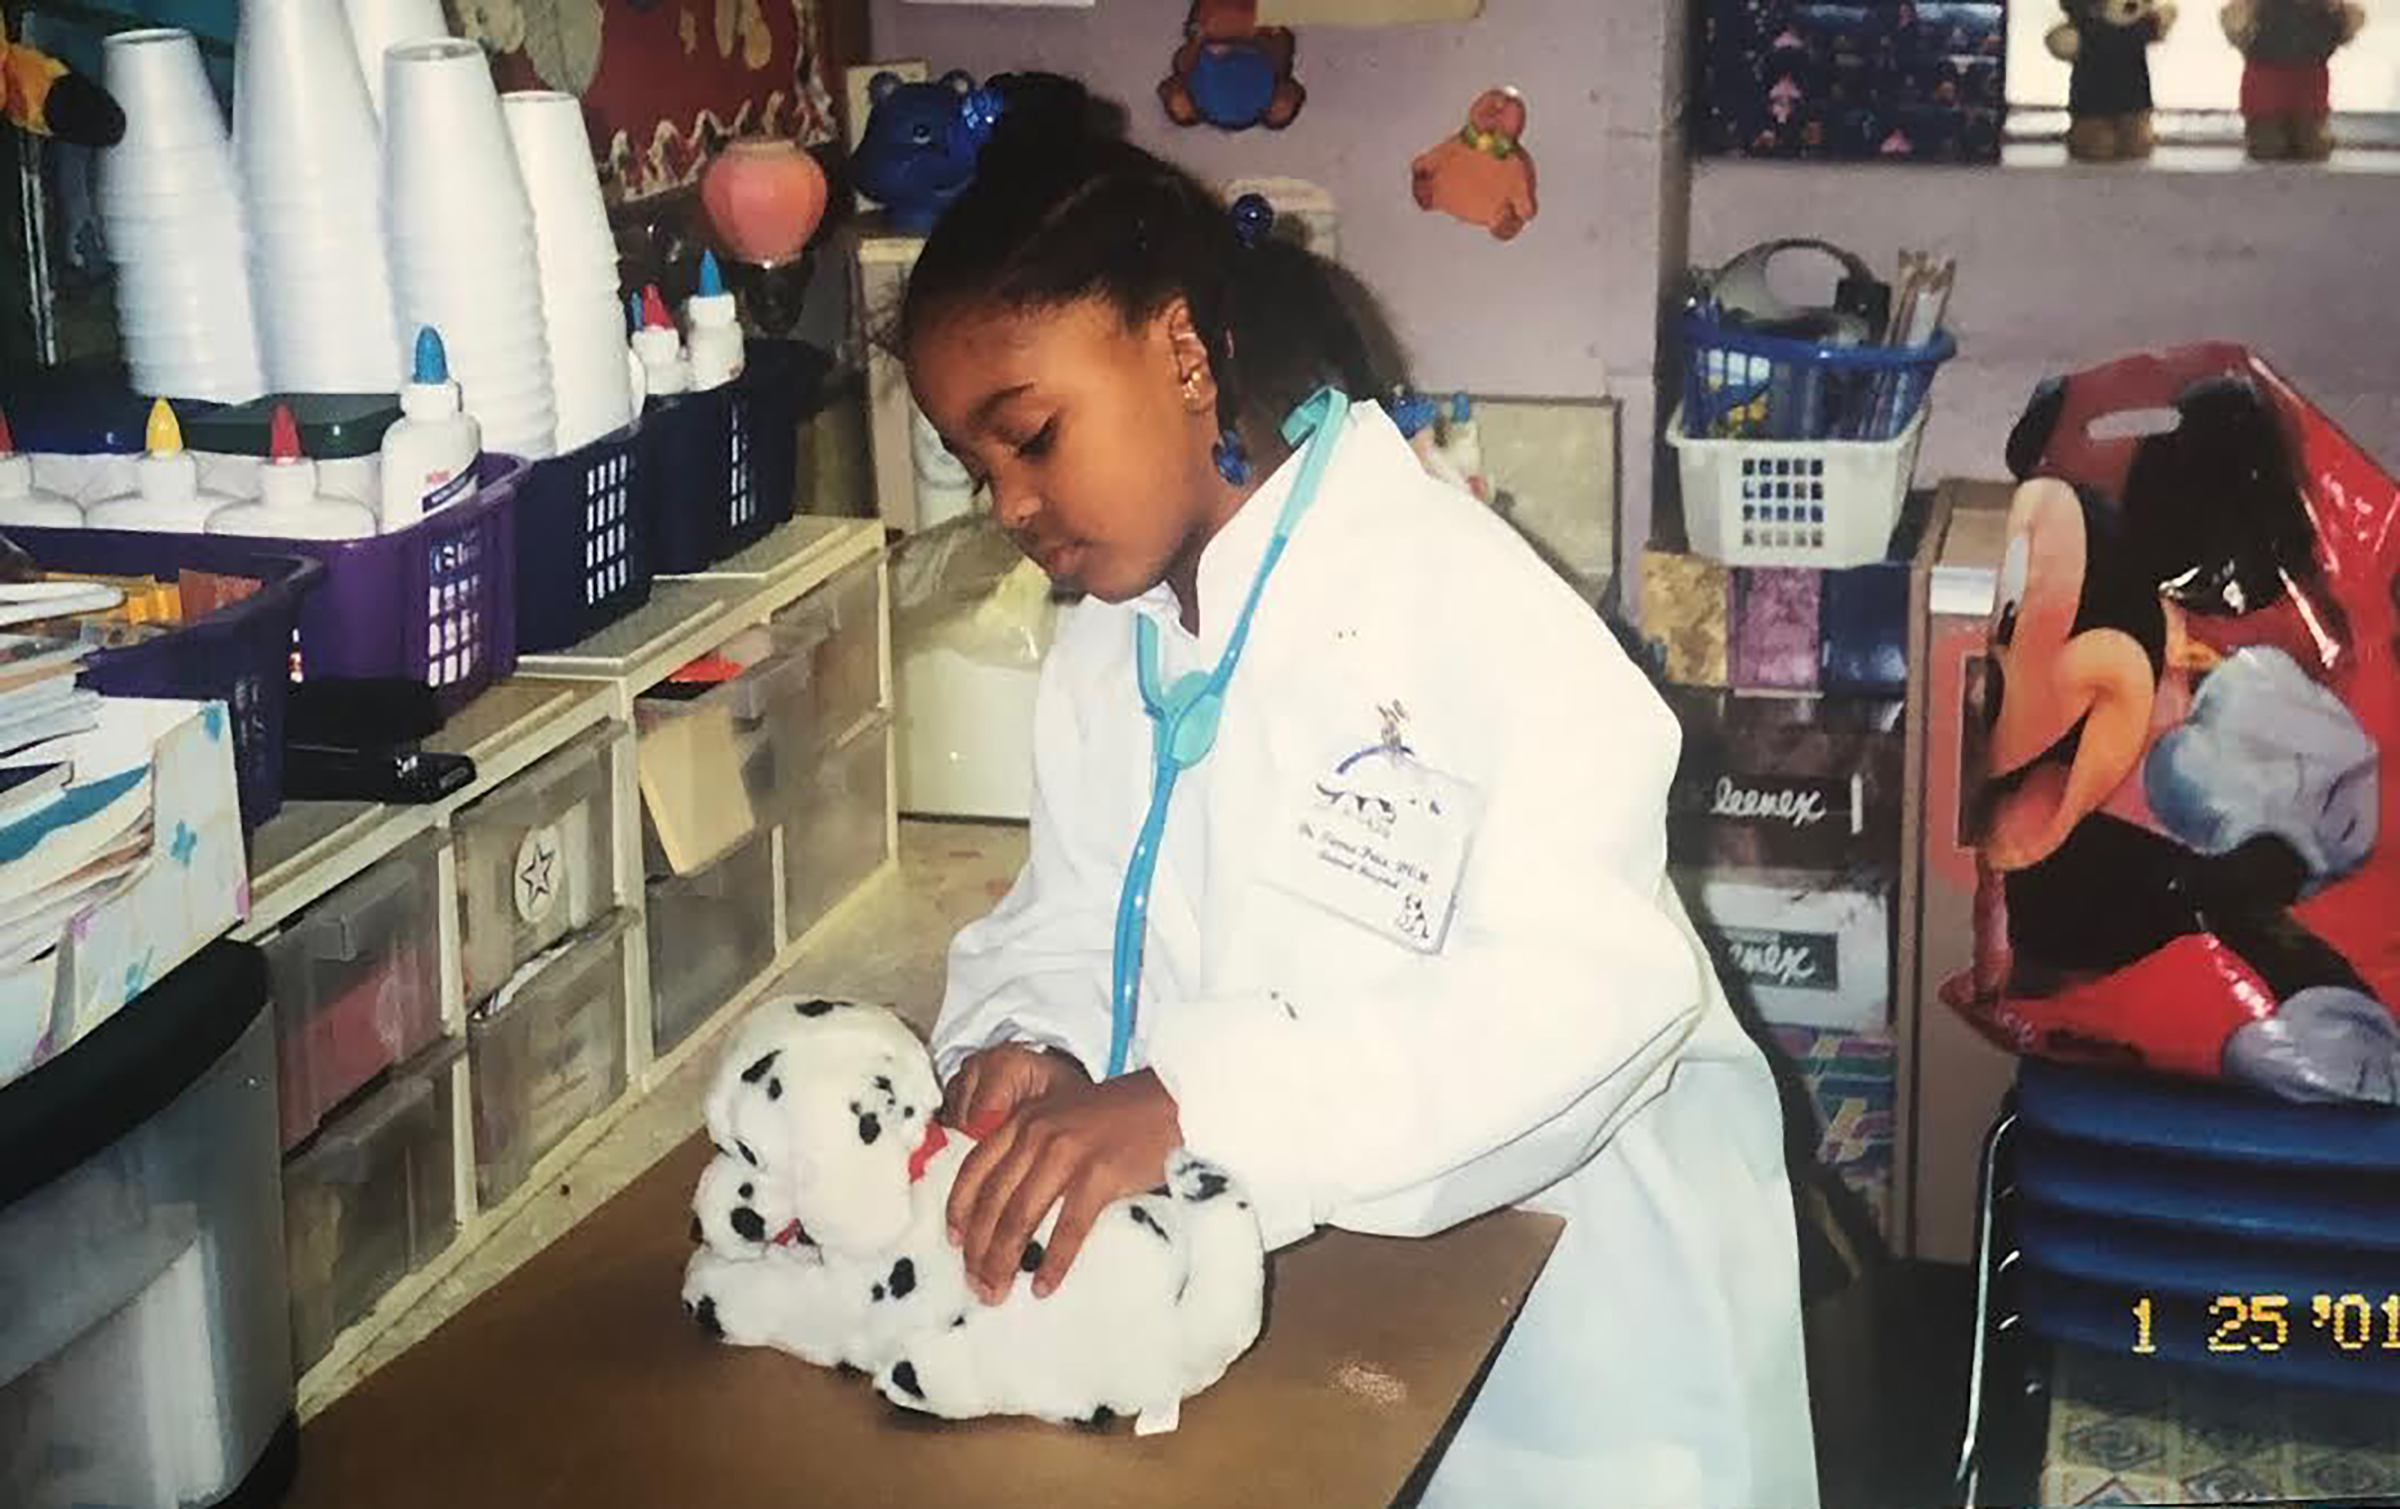 At age 6, Price attends her first-grade career day dressed as a veterinarian. She brought a stuffed animal and made sure her name tag said DVM, "so I wouldn't be mistaken for an MD," says Price. (Courtesy Tierra Price)